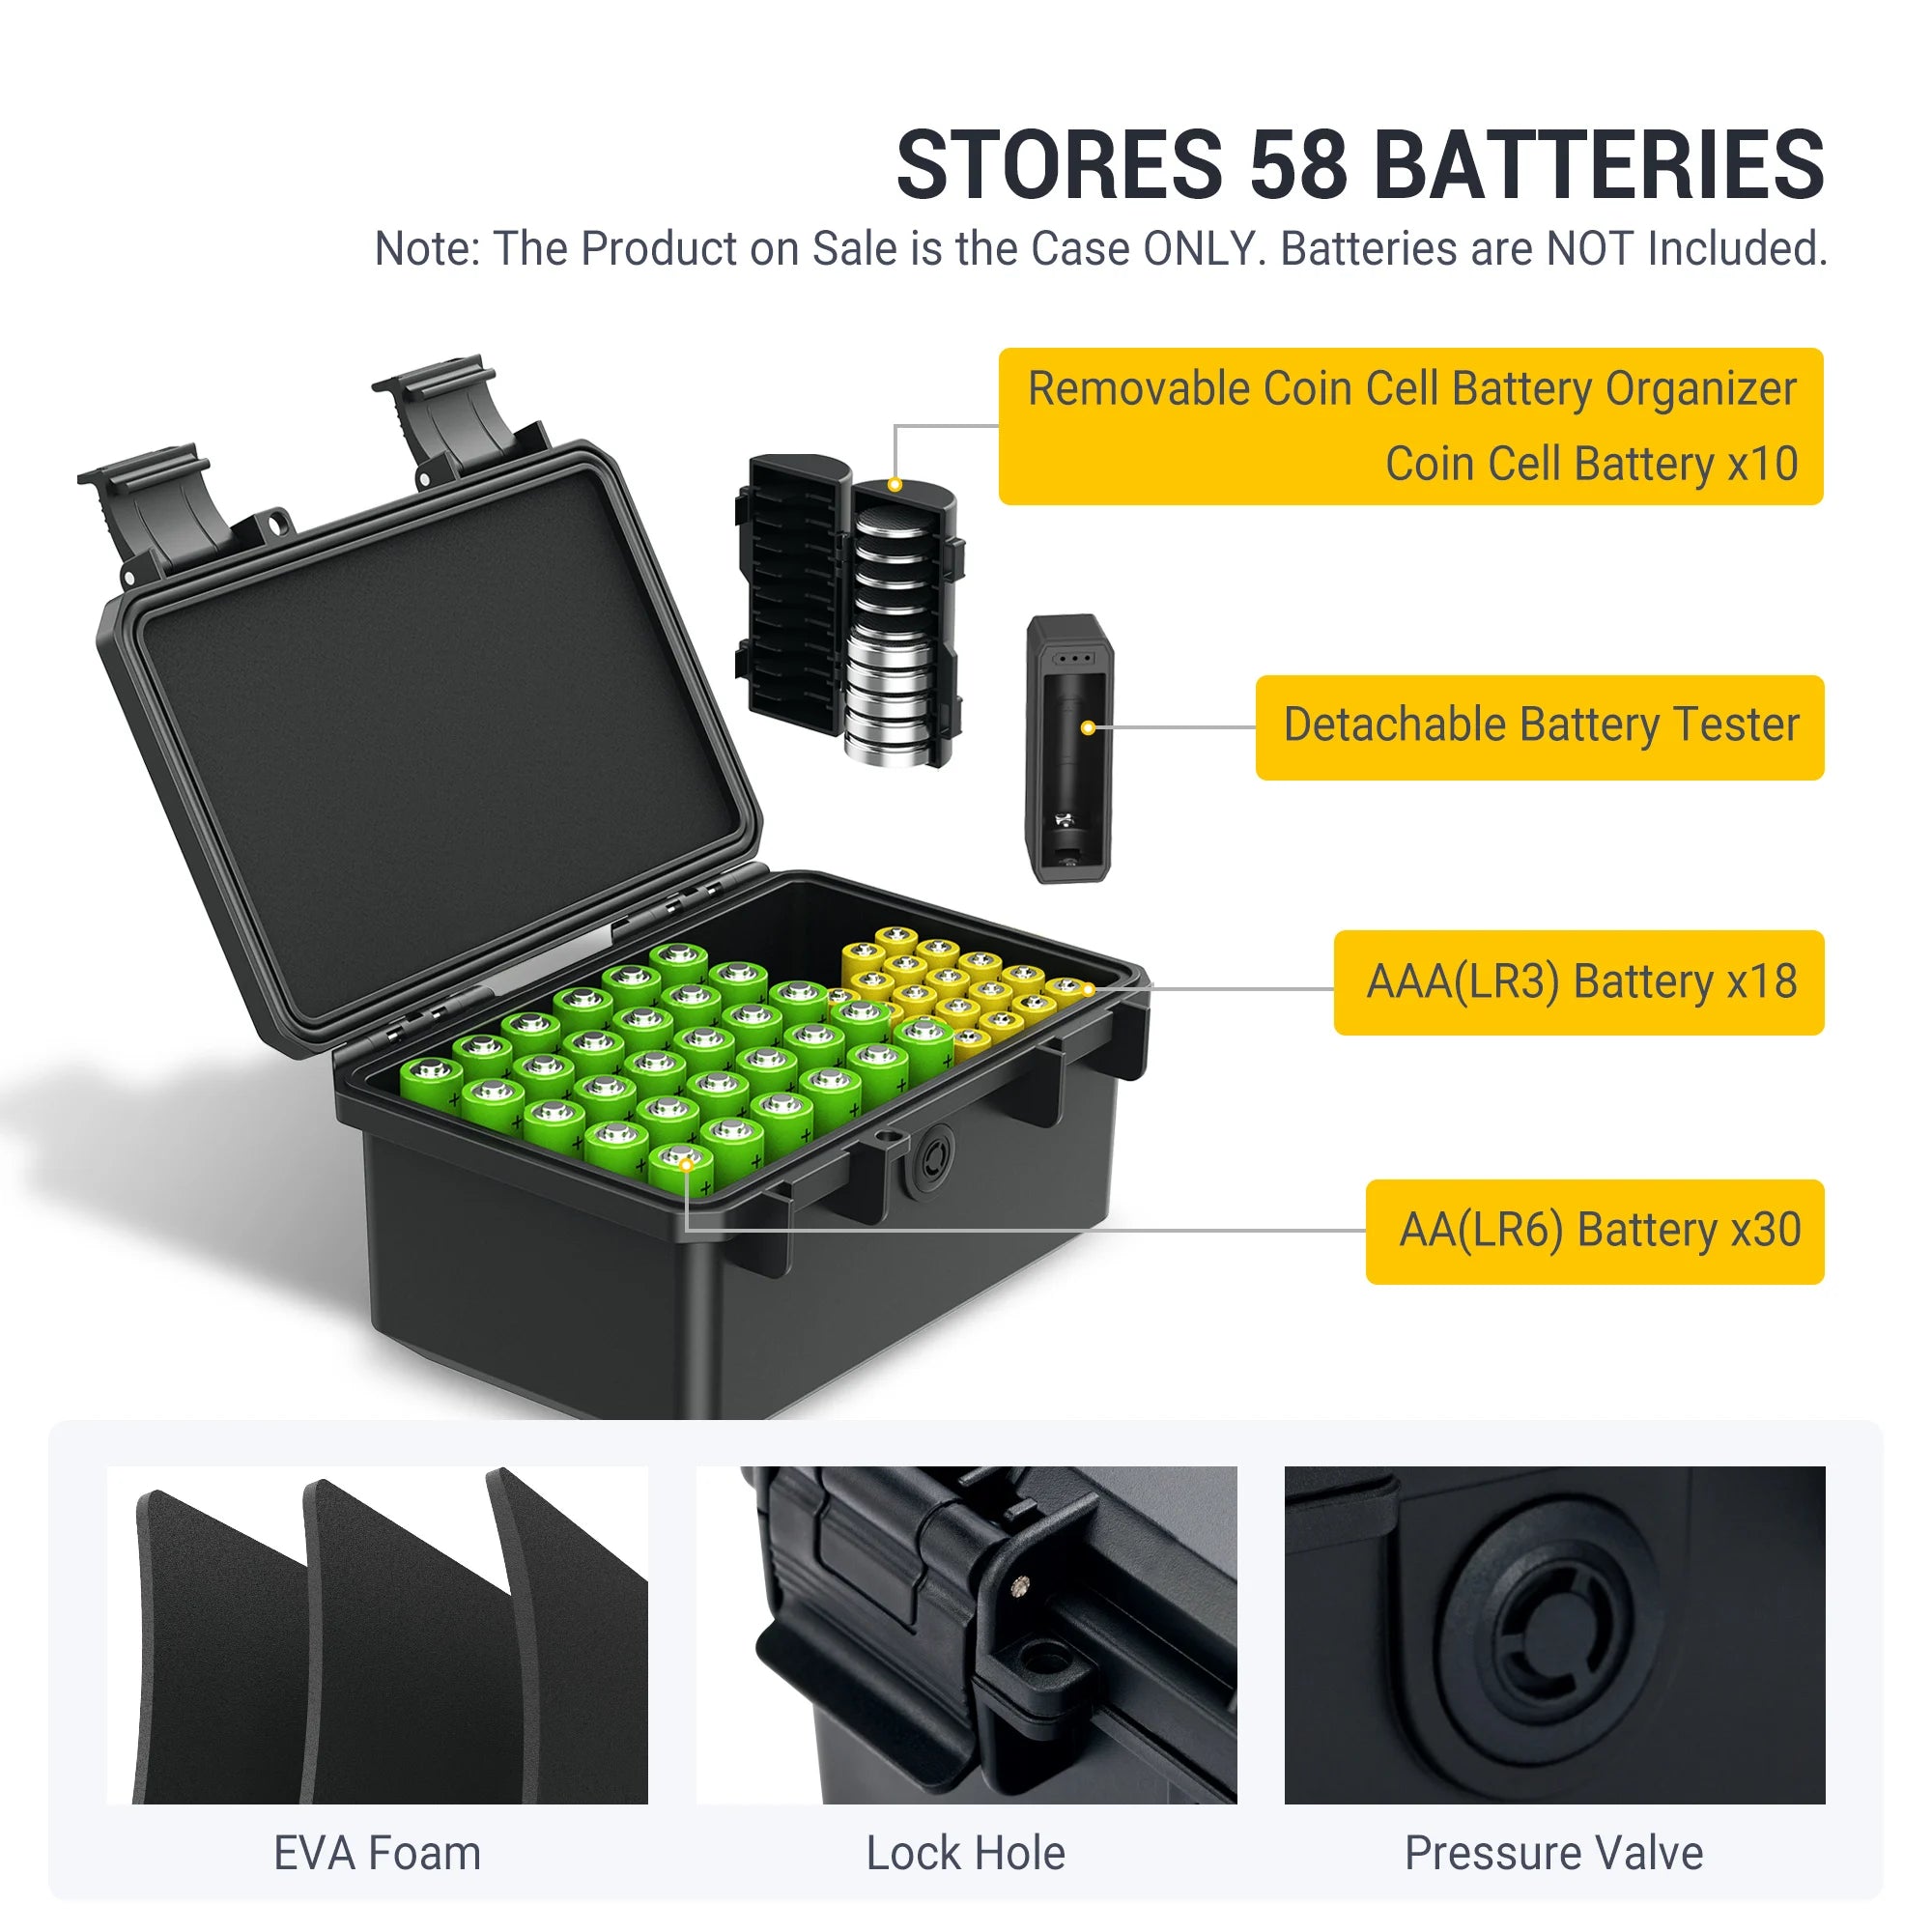 Multi Slots 18650 21700 Batteries Storage Case AA /AAA/ Coin Battery Case Holder with Battery Tester IP67 Weterproof Battery Box